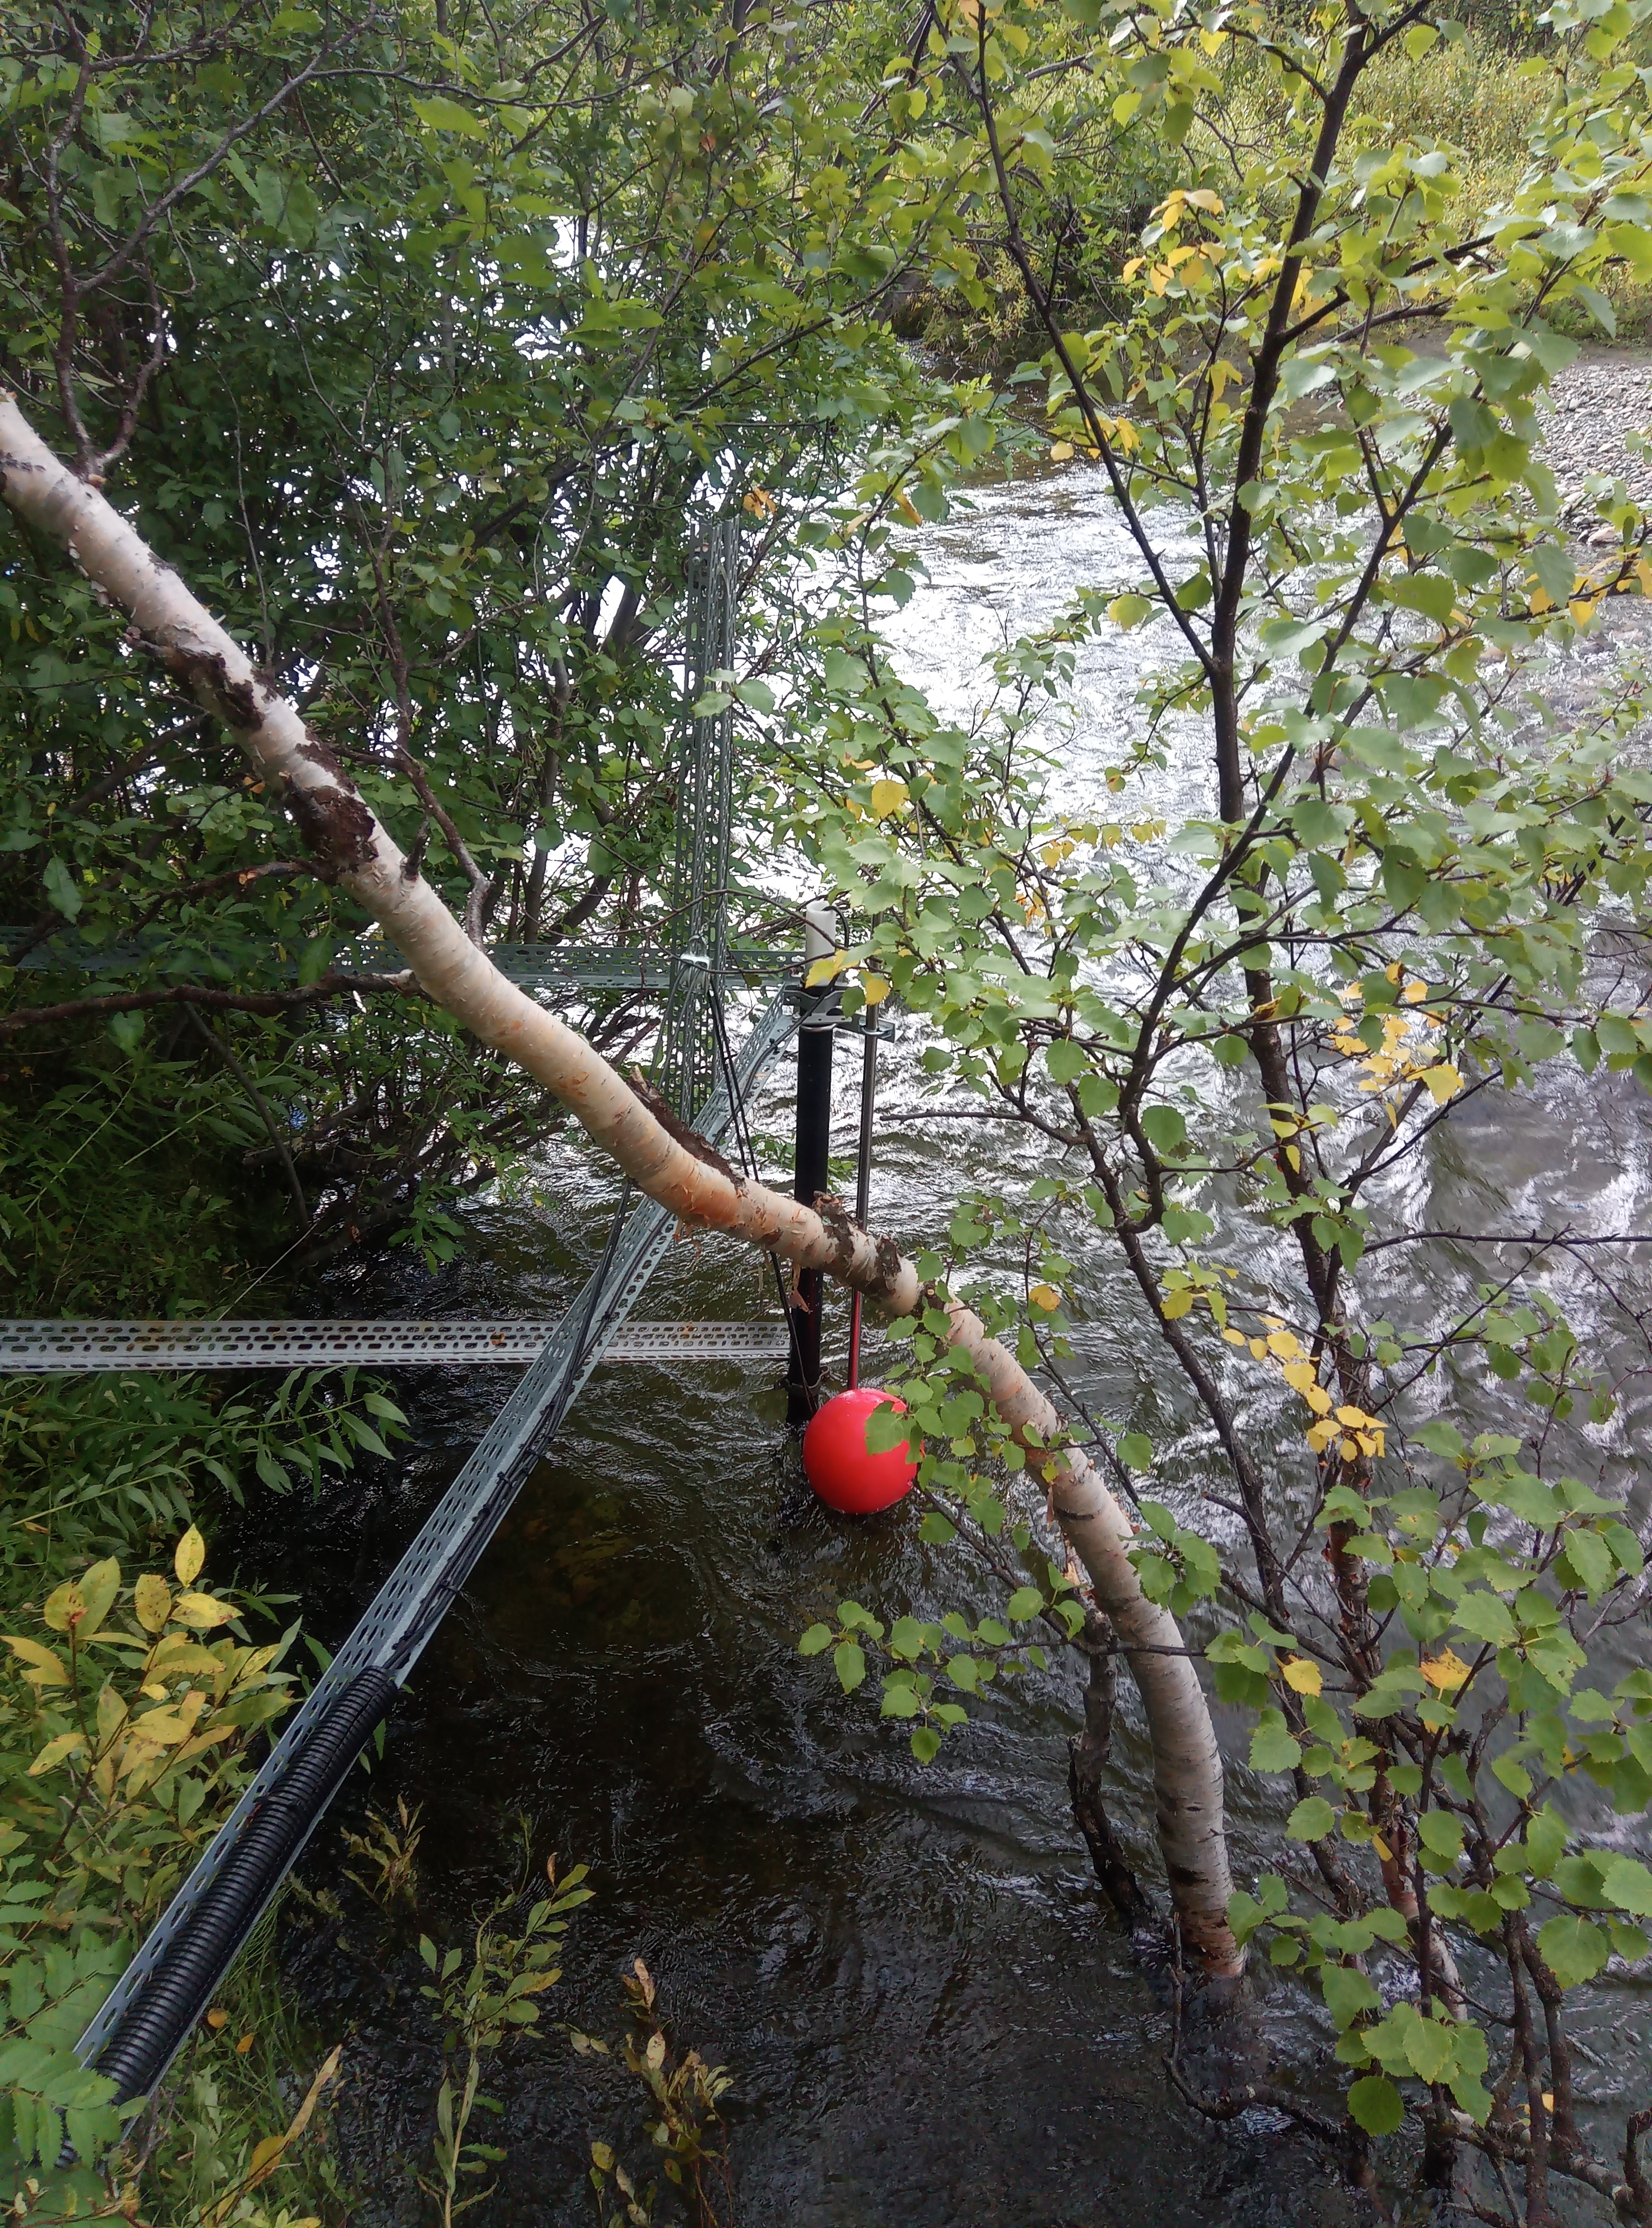 SITES Water: new installation for measuring stream O2 and CO2 concentrations. A buoy and constant force spring ensure that the cable stays tensioned and that the sensor always stays at the same water depth relative to the surface regardless of changes in water level and discharge throughout the year. This set-up also protects the sensor from sudden changes in water pressure. Photo credit: Alexander Meire